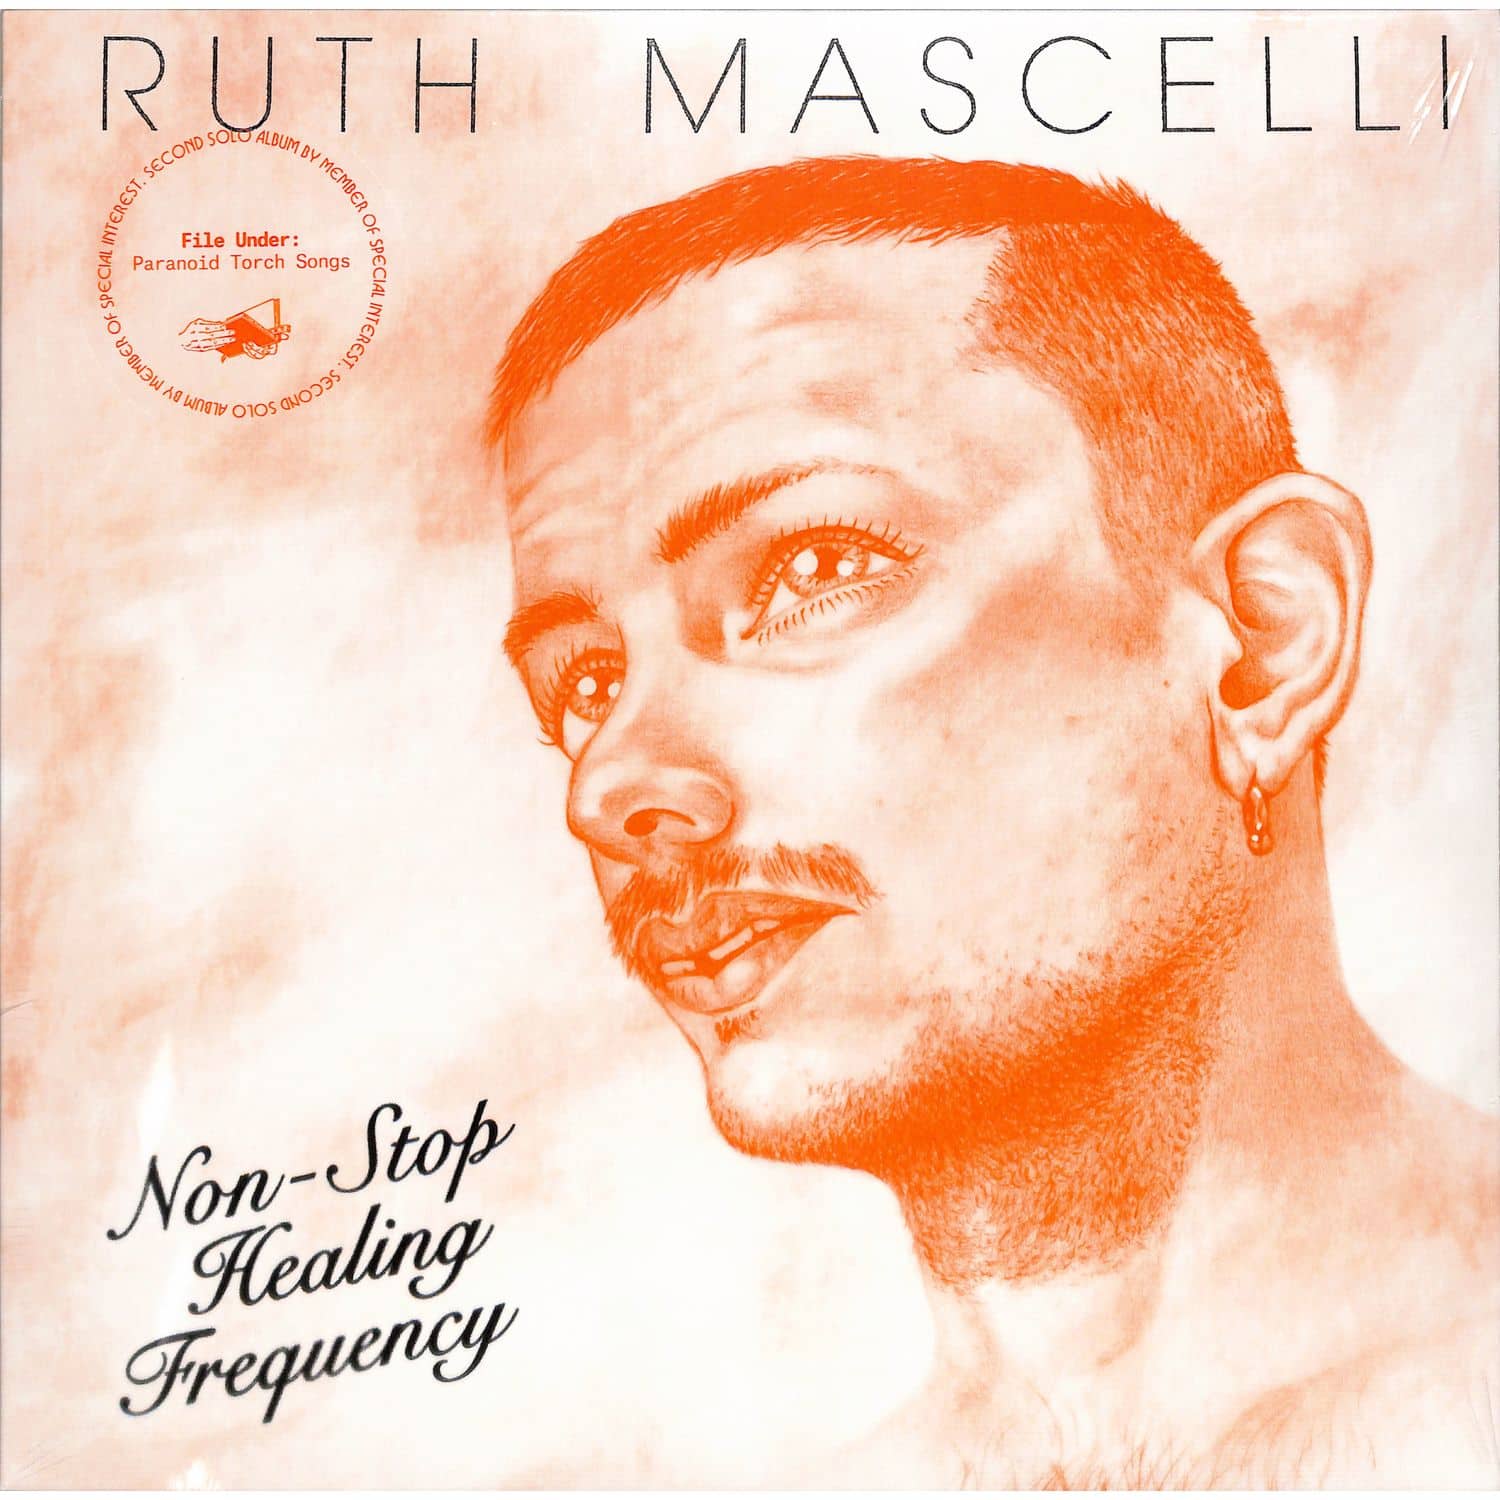 Ruth Mascelli - NON-STOP HEALING FREQUENCY 